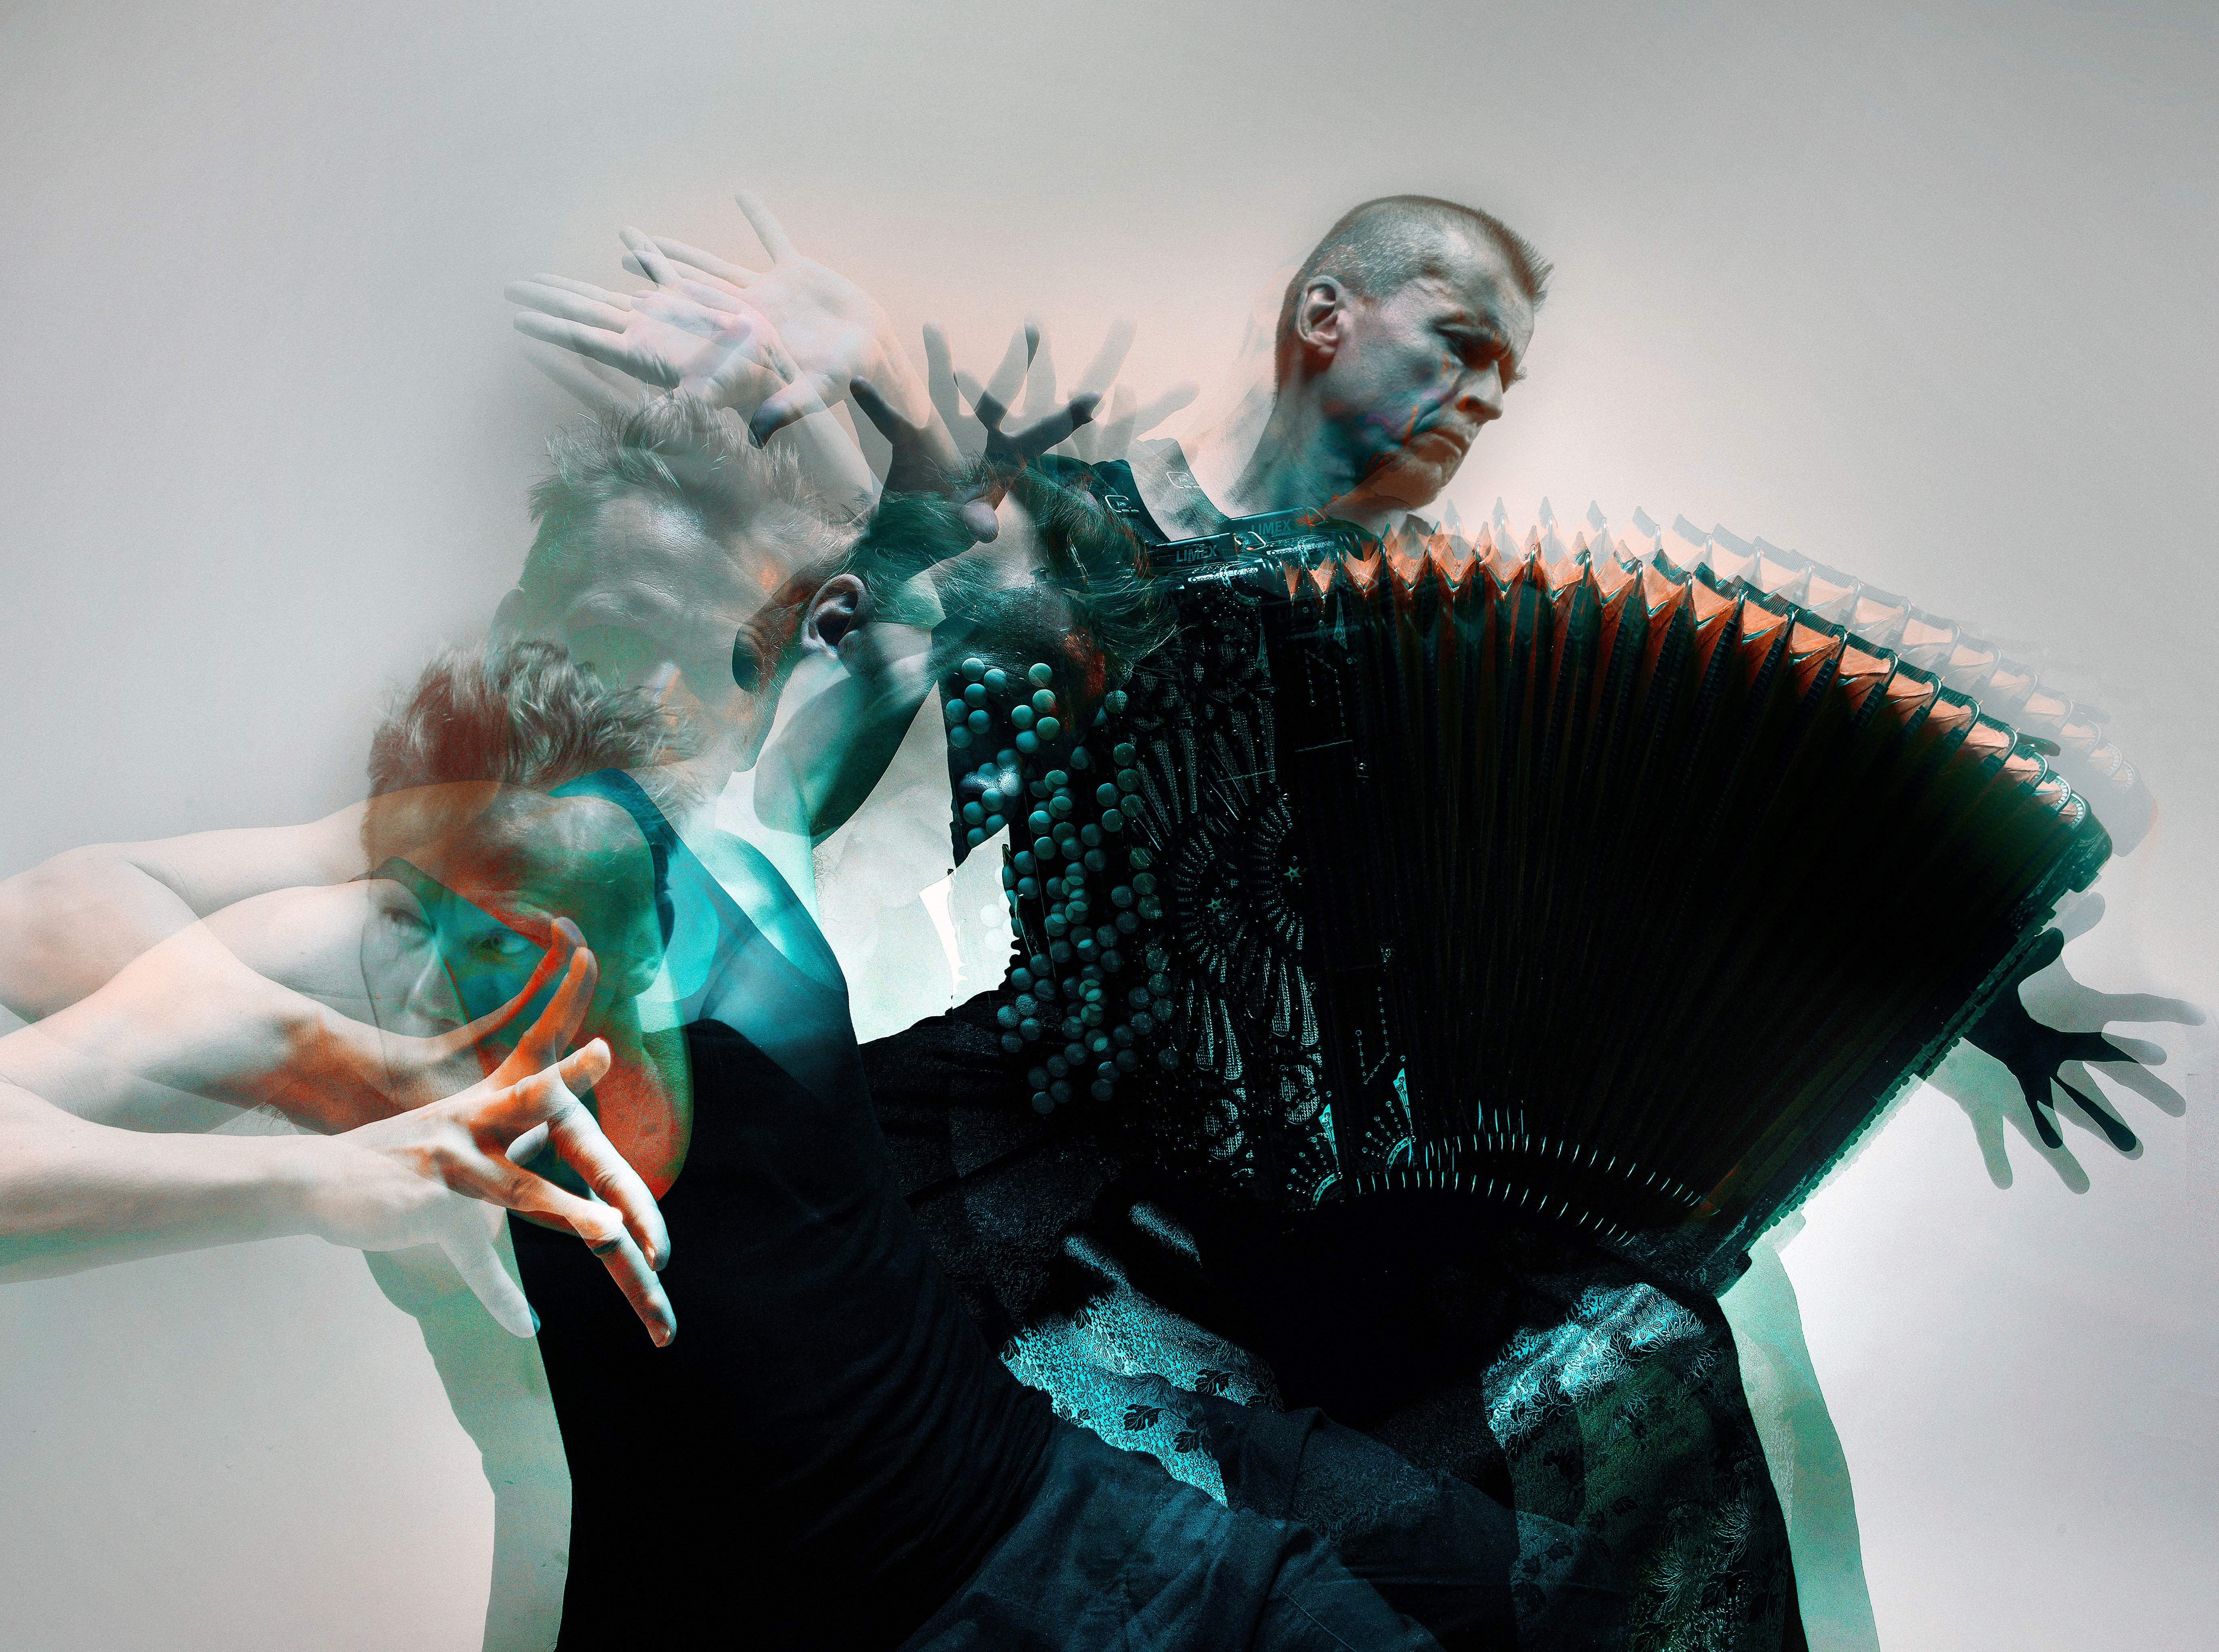 ‘Breath’ – a powerful performance of sound and movement by the Finnish duo of choreographer and dancer Tero Saarinen (left) and master accordionist Kimmo Pohjonen – forms part of Hong Kong’s World Cultures Festival: The Nordics, showcasing Scandinavian music, theatre, dance and multimedia programmes. Photo: Perttu Saksa